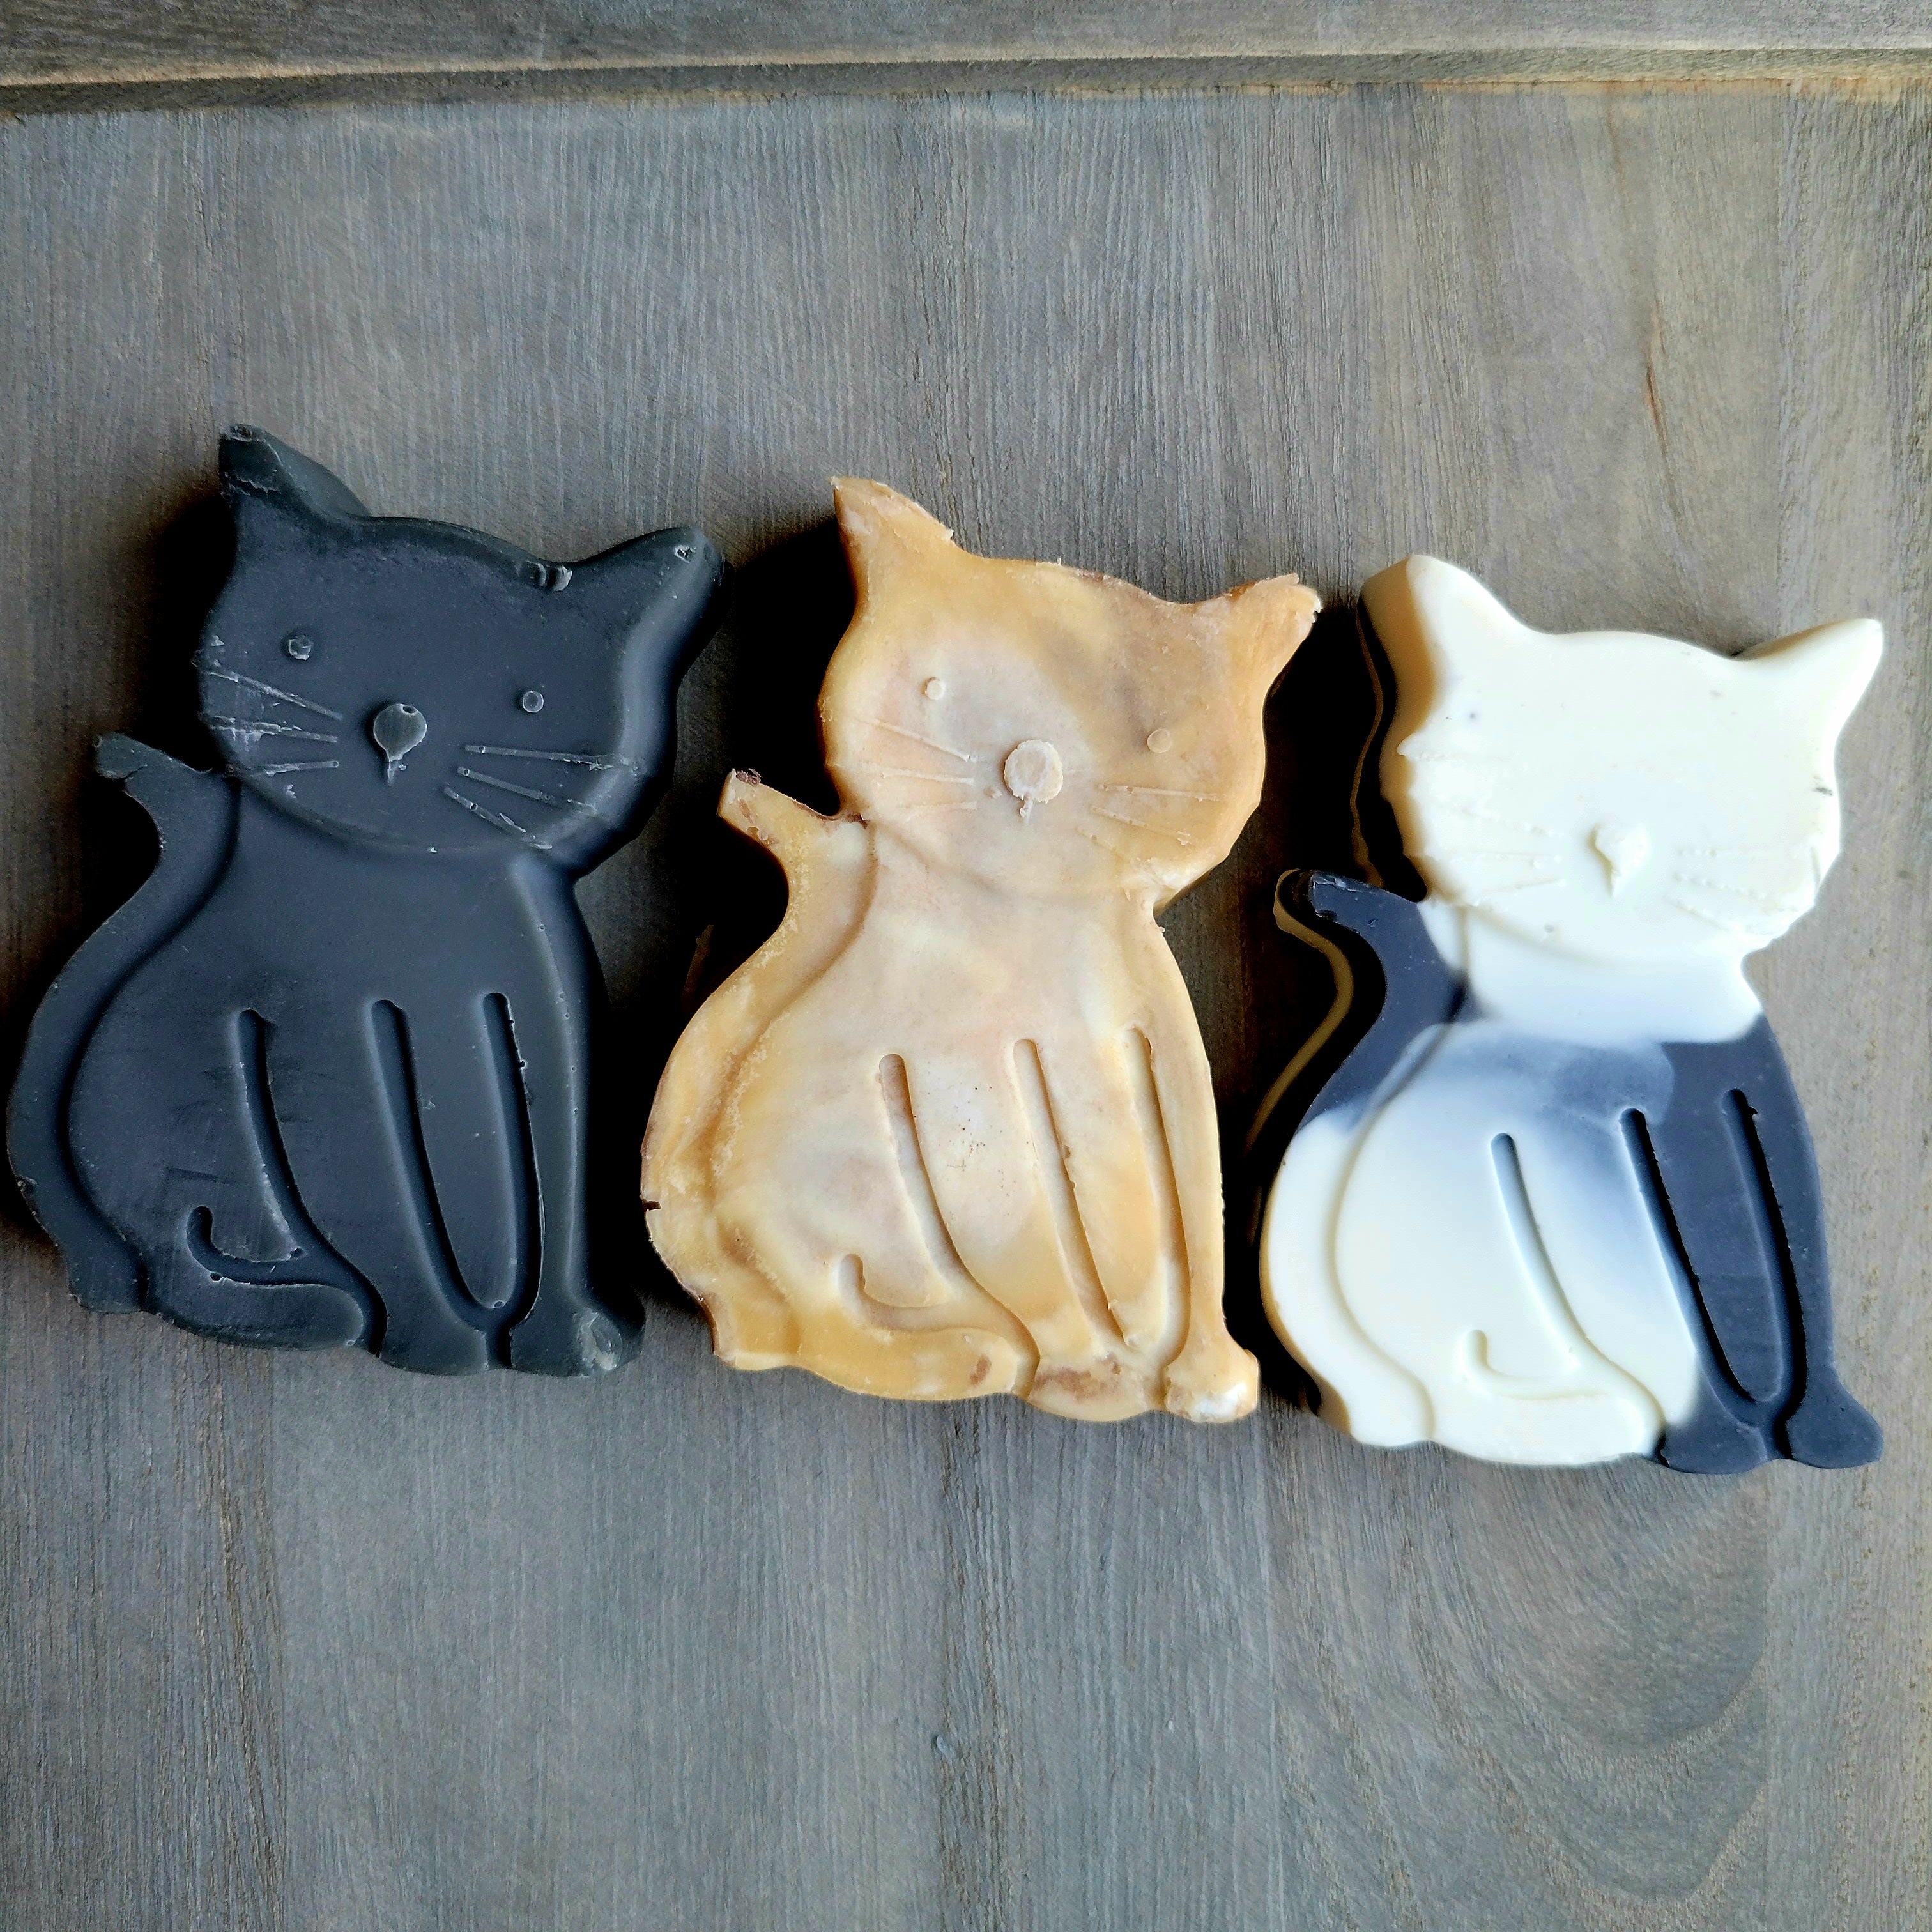 Cat Soap For Humans, Cat themed Gifts